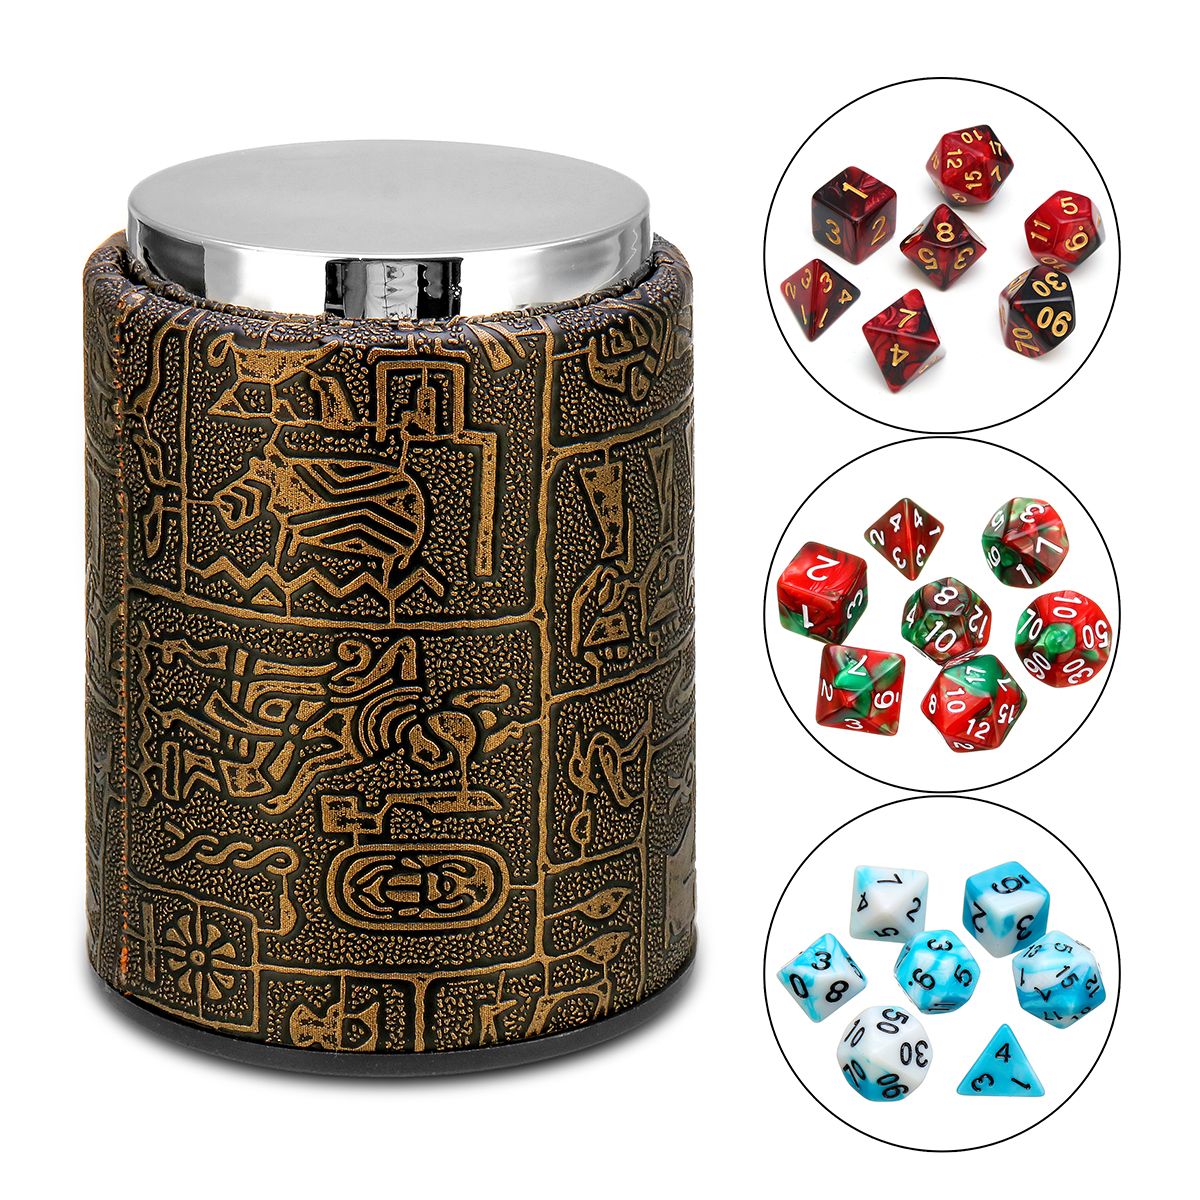 7-Pcs-Polyhedral-Dices-With-Dice-Cup-Role-Playing-Game-Dices-Set-RPG-MTG-Desk-Game-Multisided-Dices-1407058